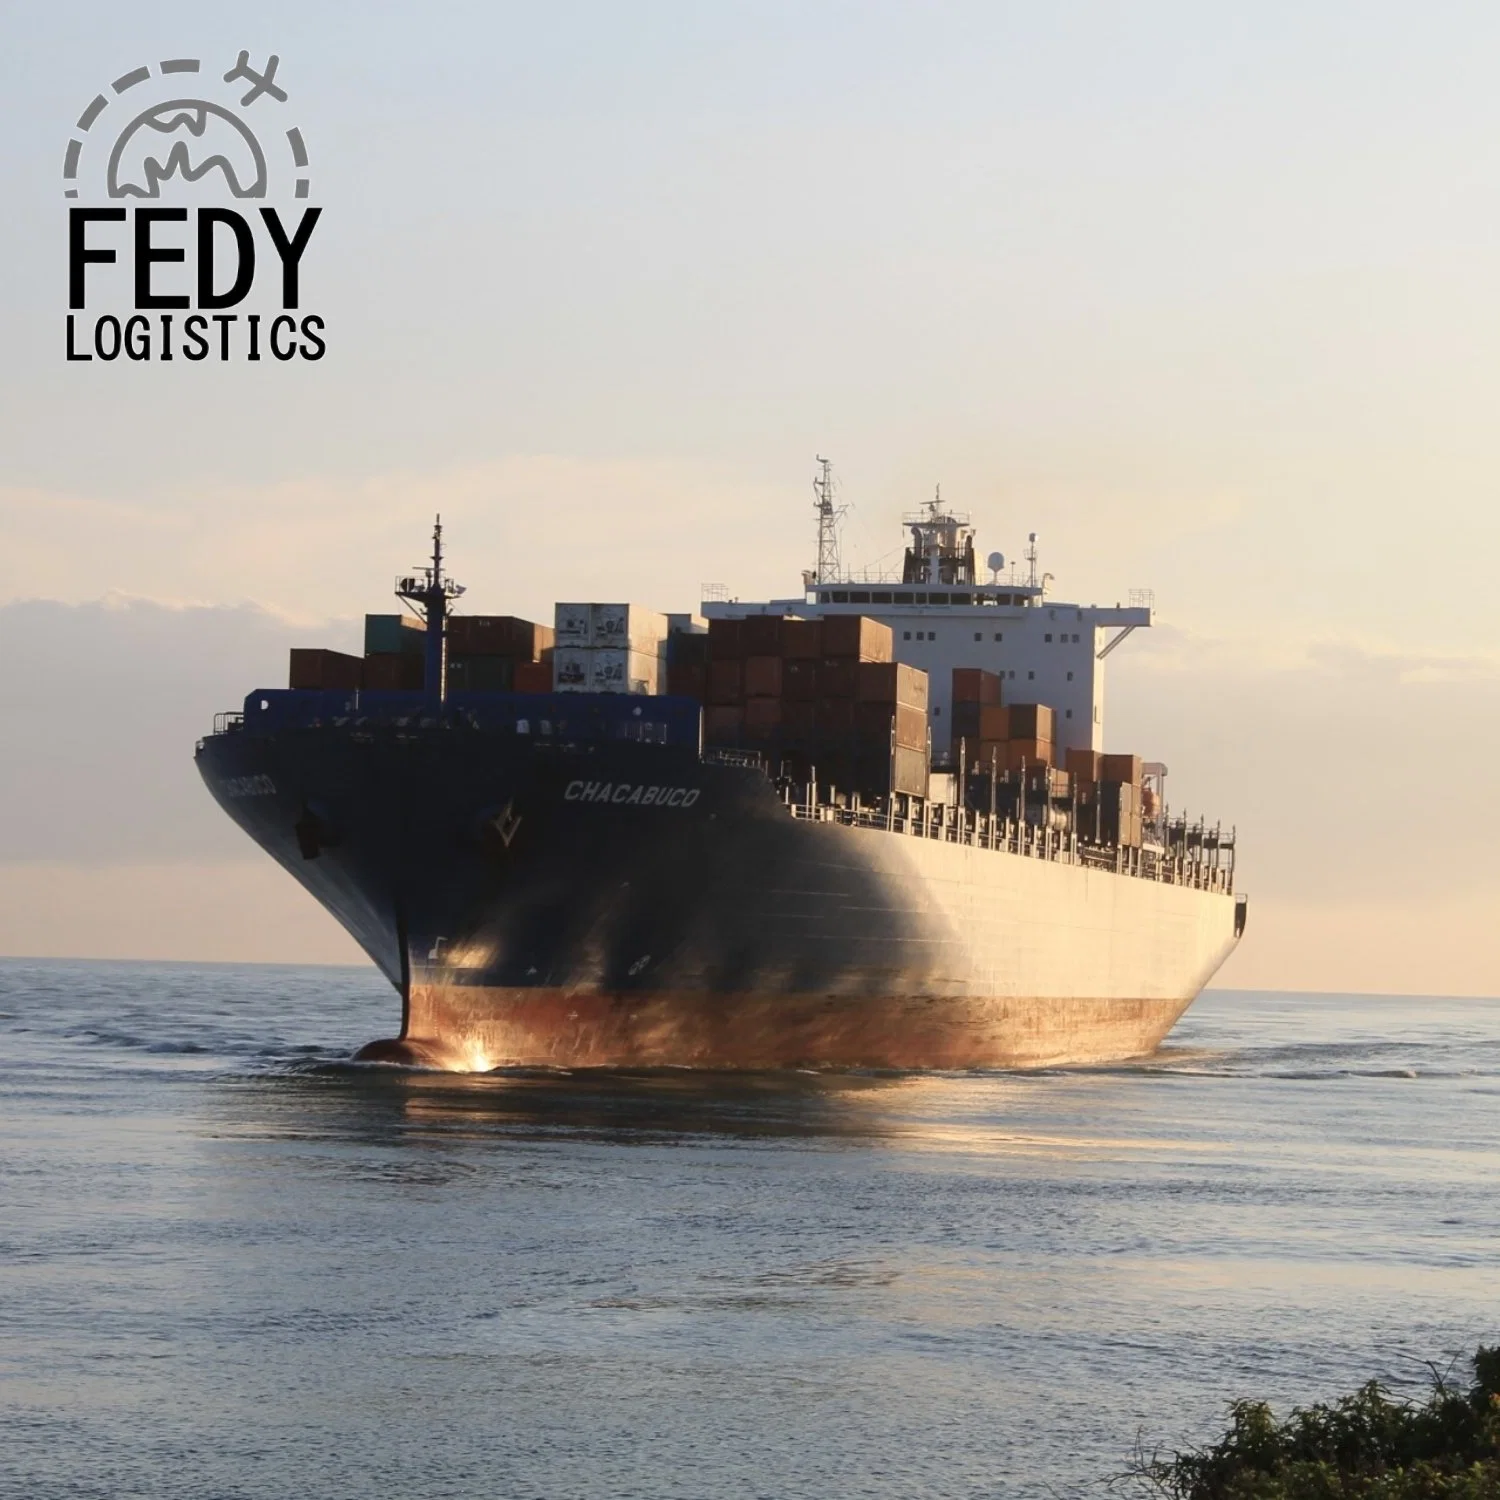 DDP Sea Shipping/Air Cargo Freight Forwarder to Luxembourg/Netherlands/Poland/Slovakia/Slovenia Fba Amazon Export Agents Logistics UPS/FedEx Express Rates